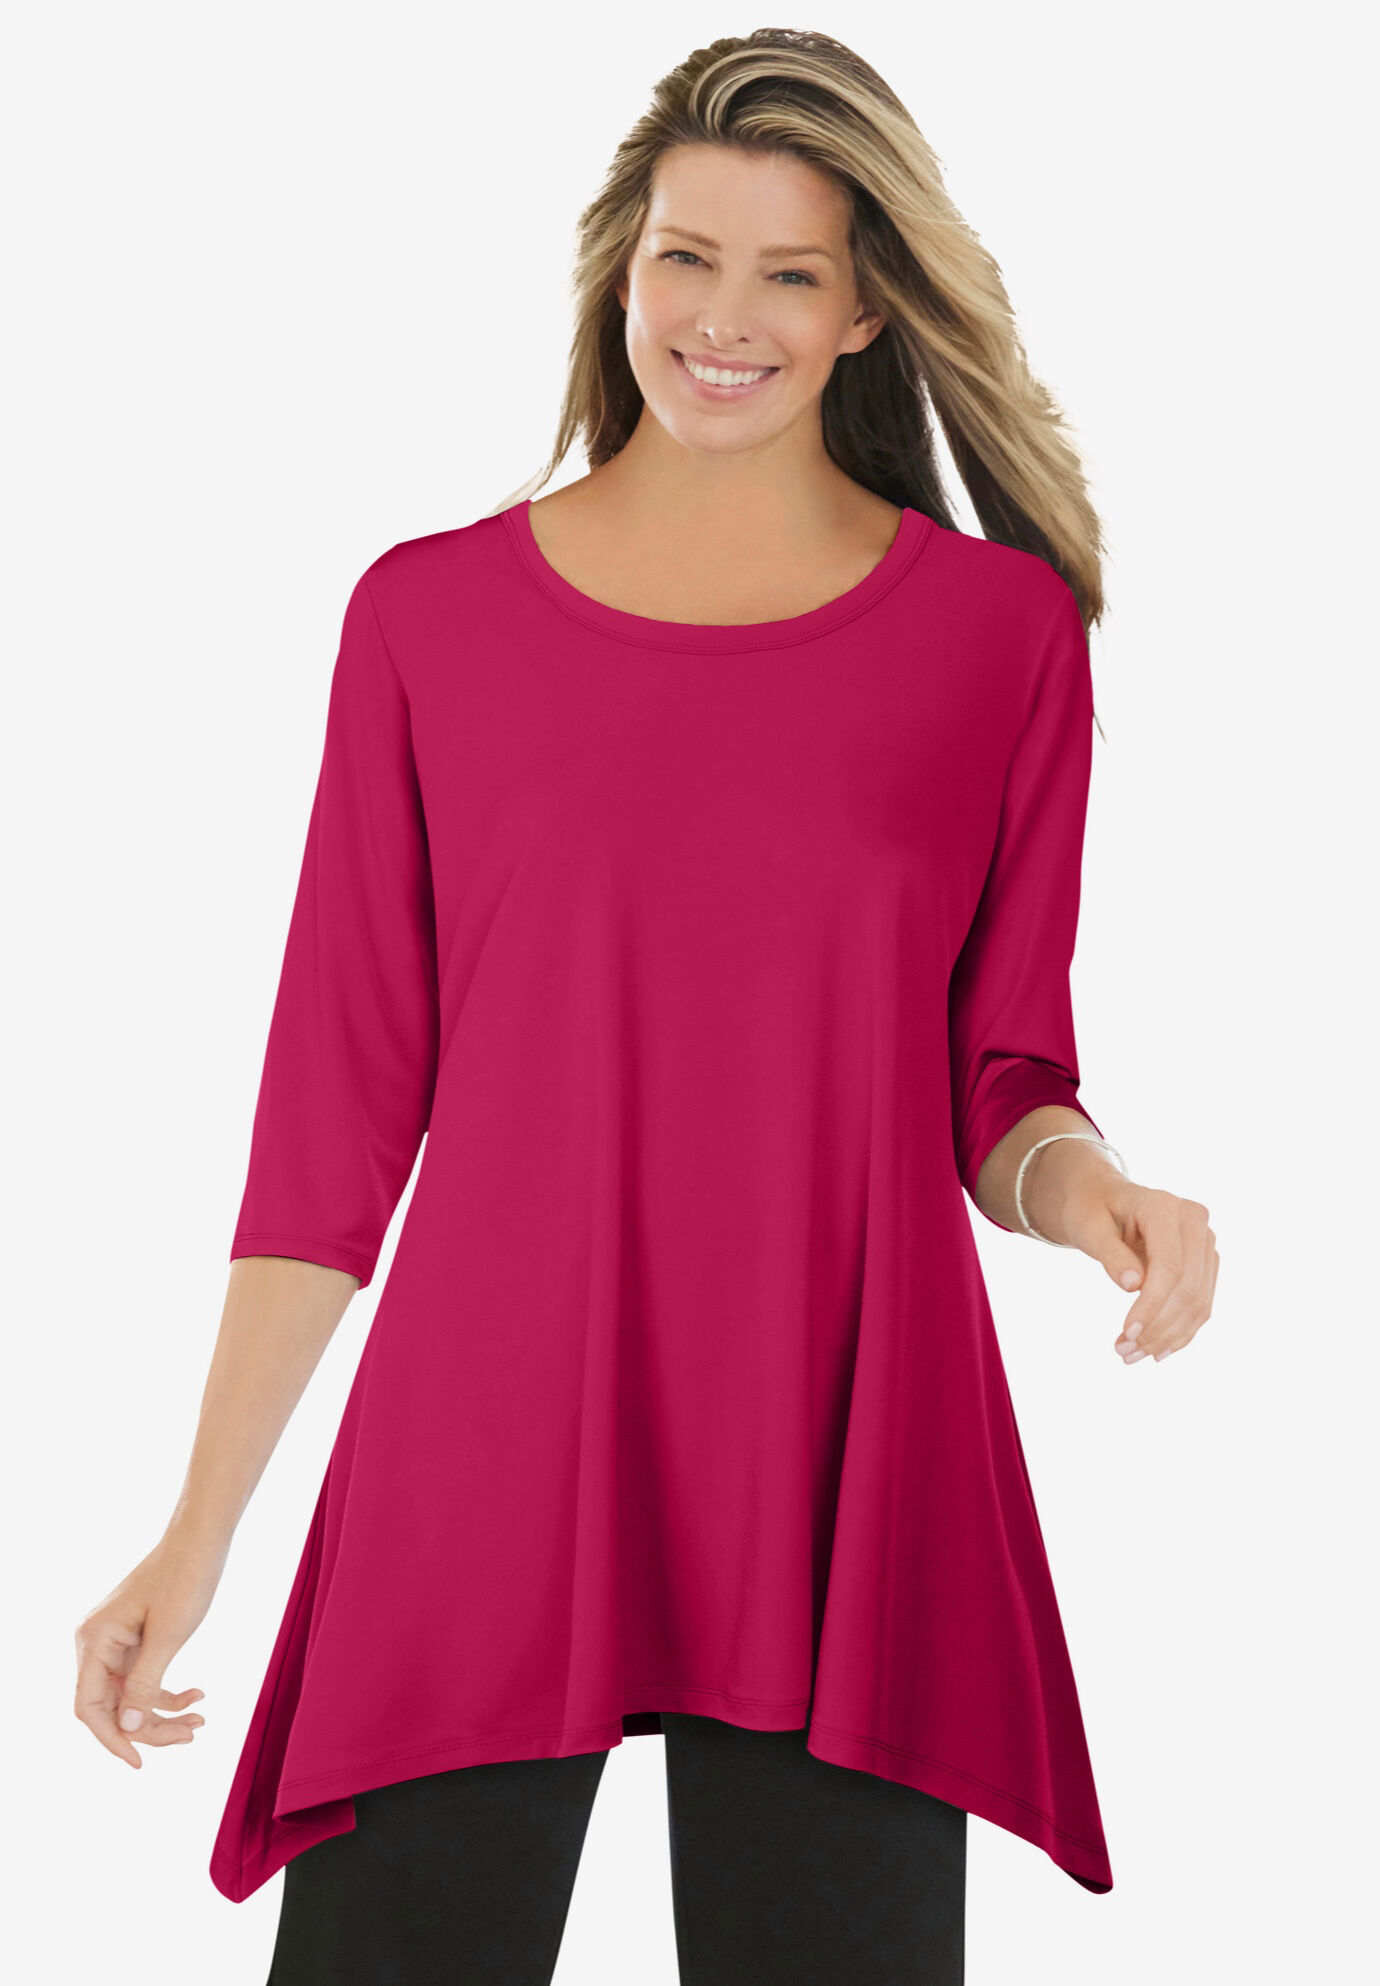 The Sharkbite Tunic | Woman Within